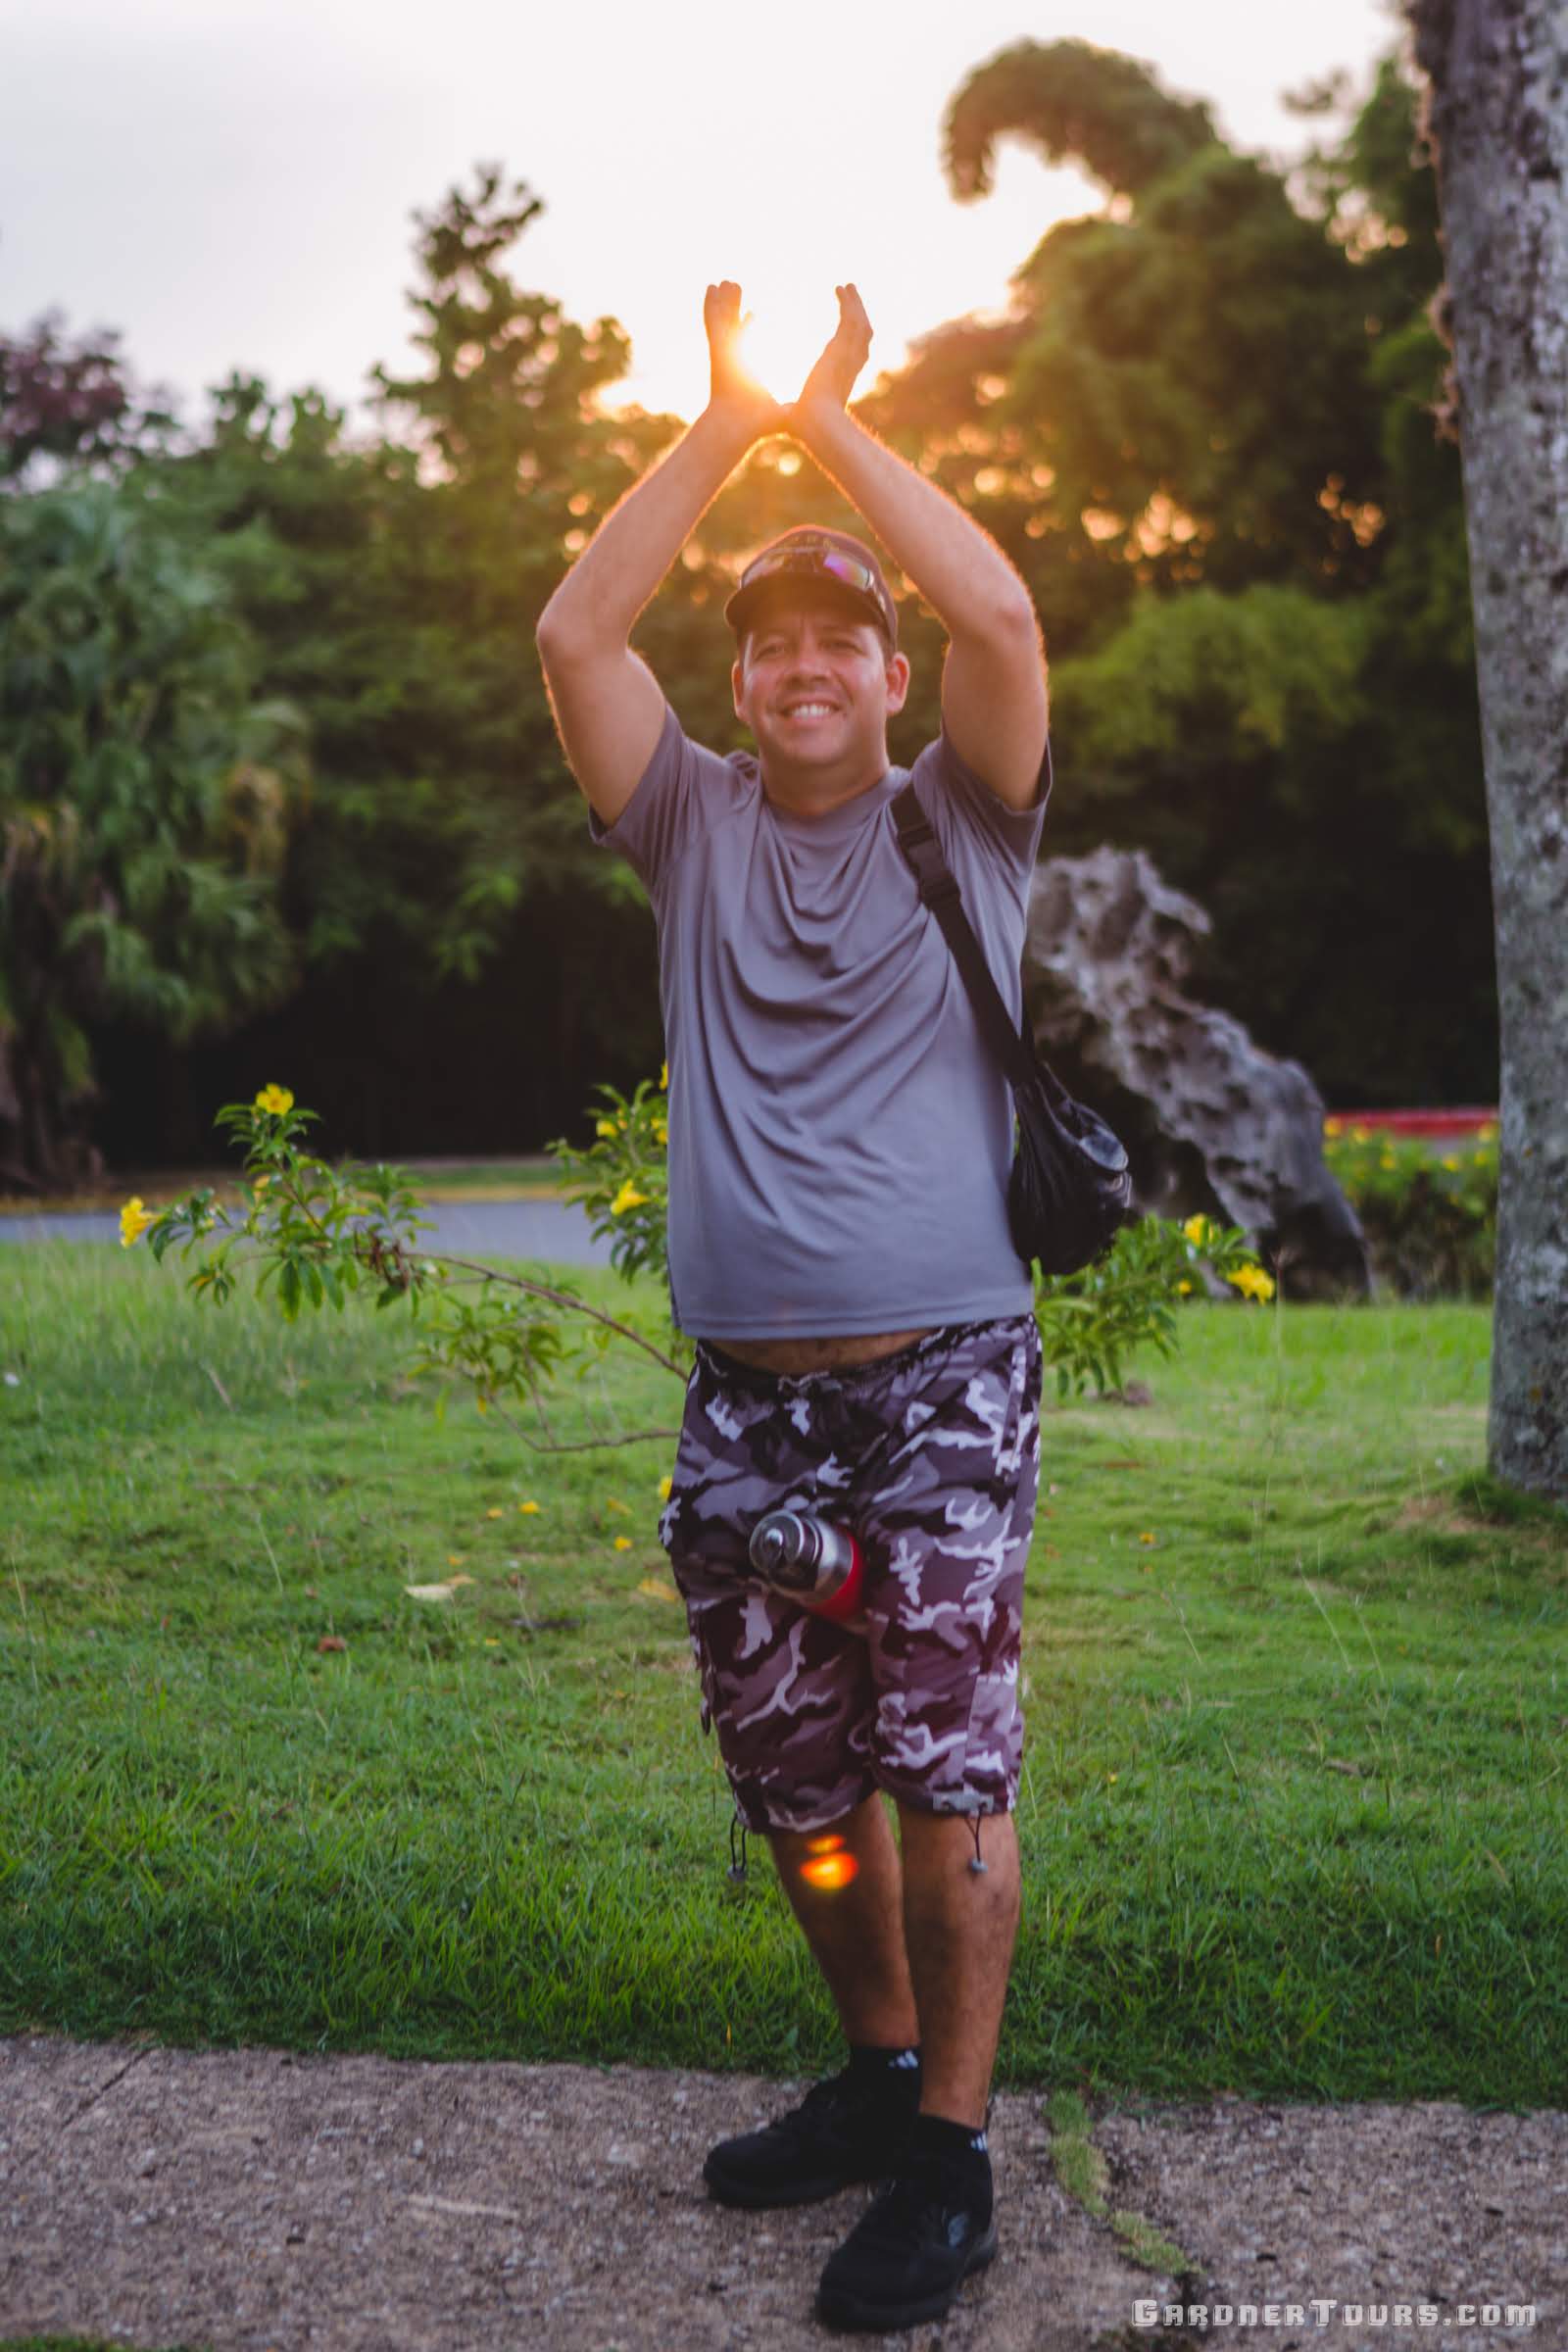 Gardner Tours Cuban Tour Guide Yunior smiling as he holds the setting sun in his hands over his head in Viñales, Cuba